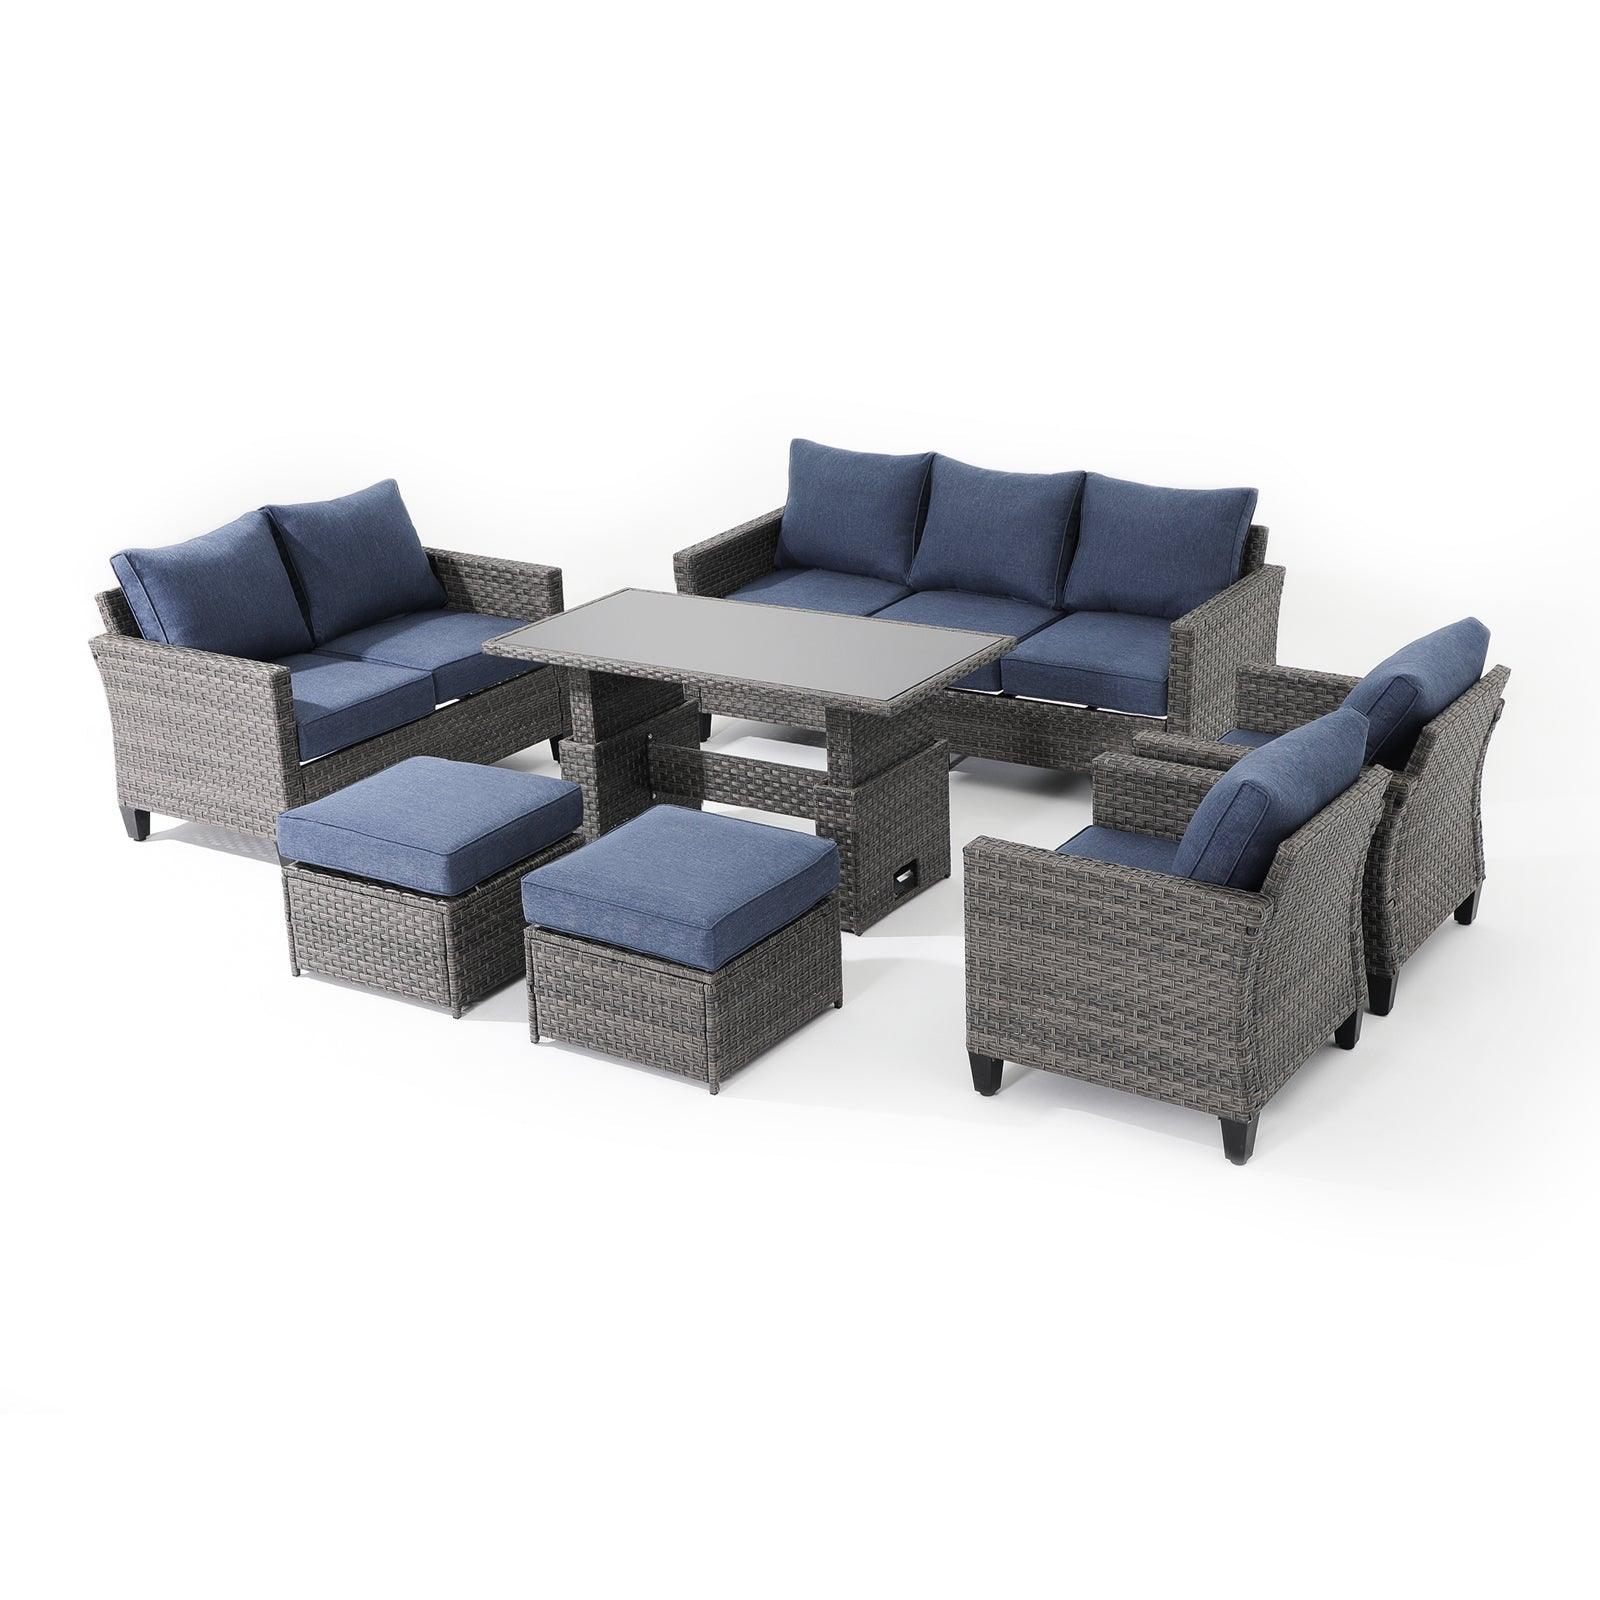 Ayia 7-Piece outdoor Sofa Set with Rattan design, Navy Blue cushions, a 3-seater sofa, 2 armchairs, 2 ottomans, 1 loveseat, 1 lift-top outdoor dining table, left - Jardina Furniture #Piece_7-pc#Color_Navy Blue#Style_with Ottomans & Table